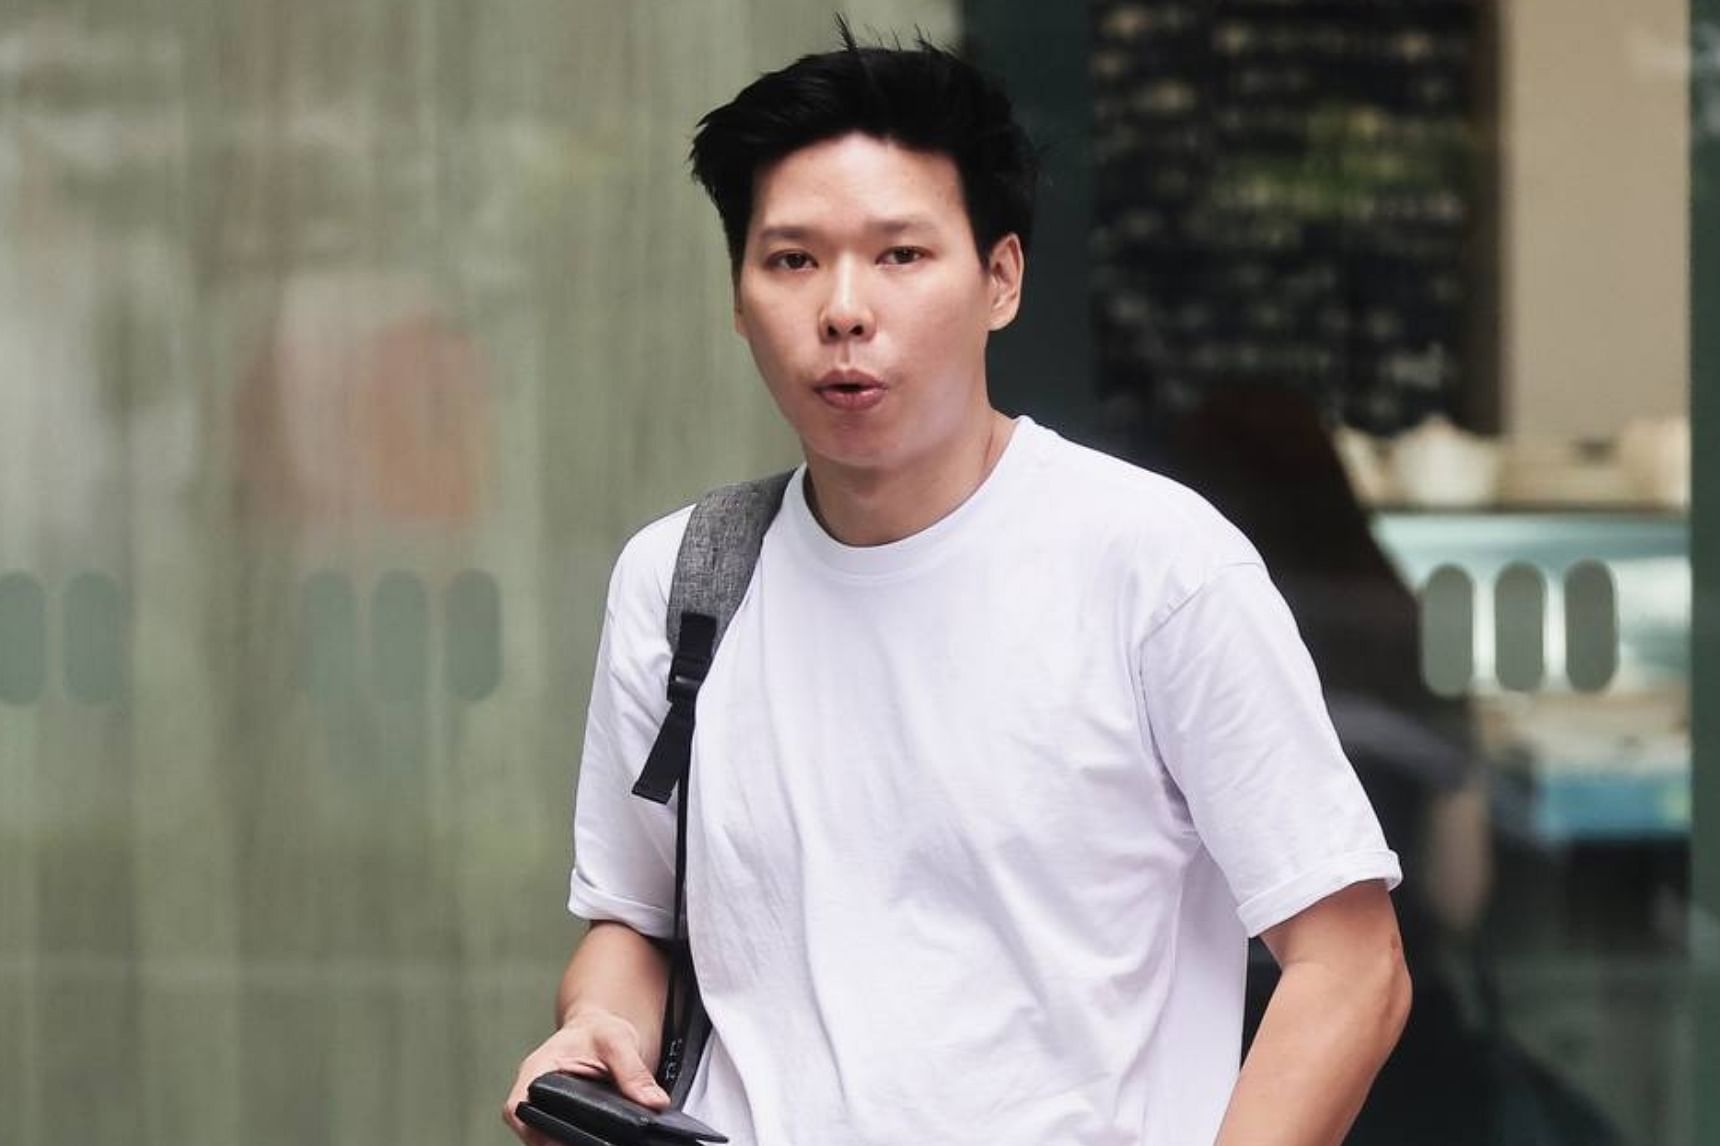 Jail for carpenter who pocketed $10,000 for role in cheating cousin’s employer